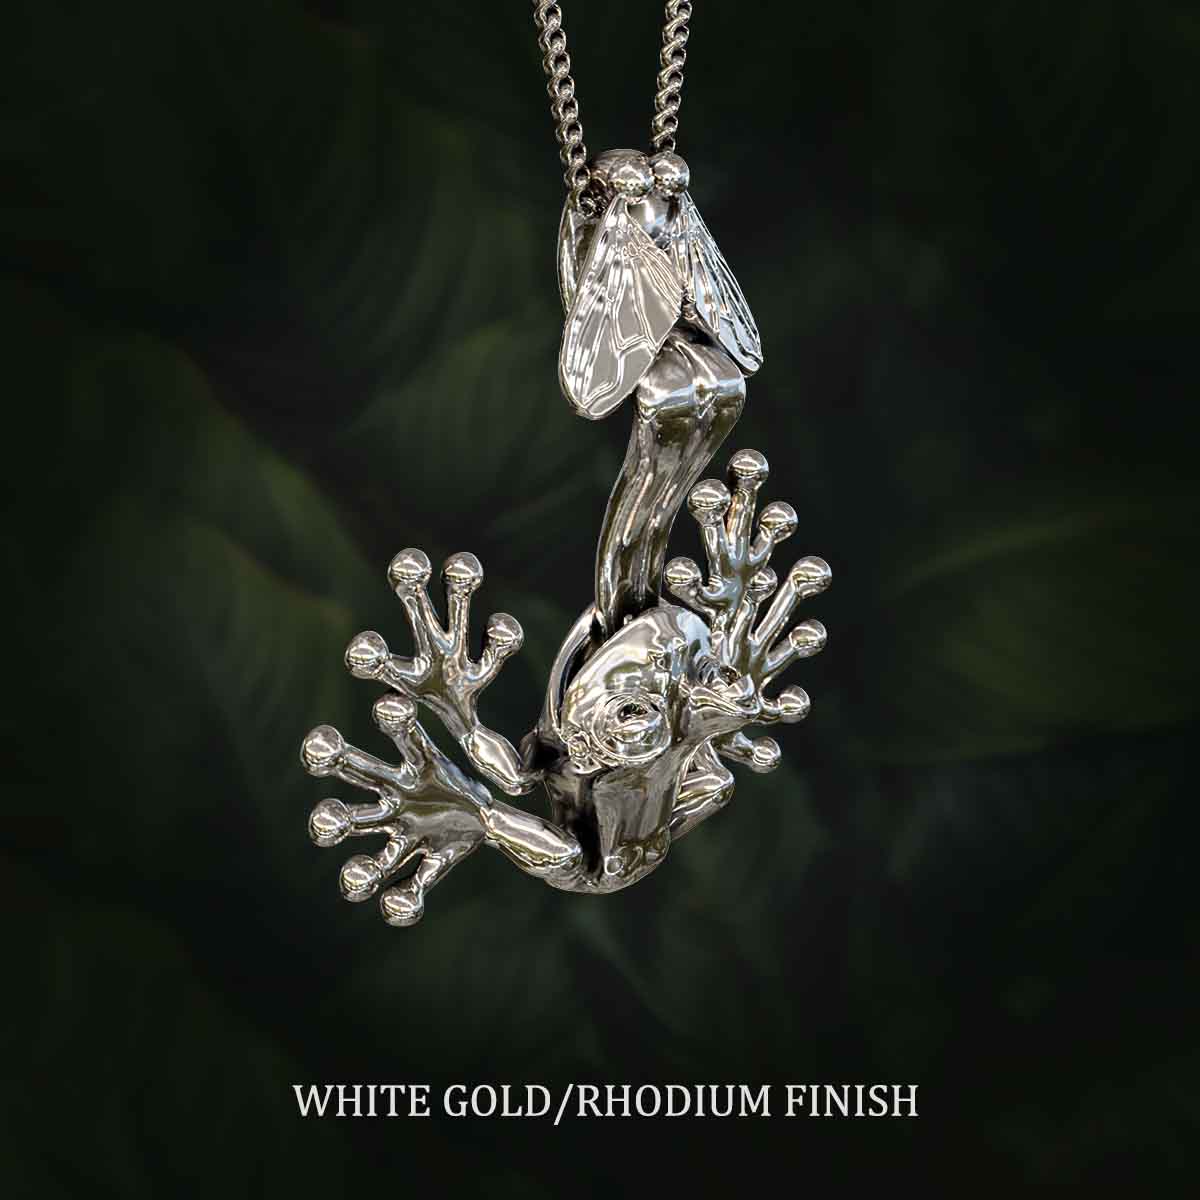 White-Gold-Rhodium-Finish-Frog-Catching-Fly-With-Tongue-Pendant-Jewelry-For-Necklace